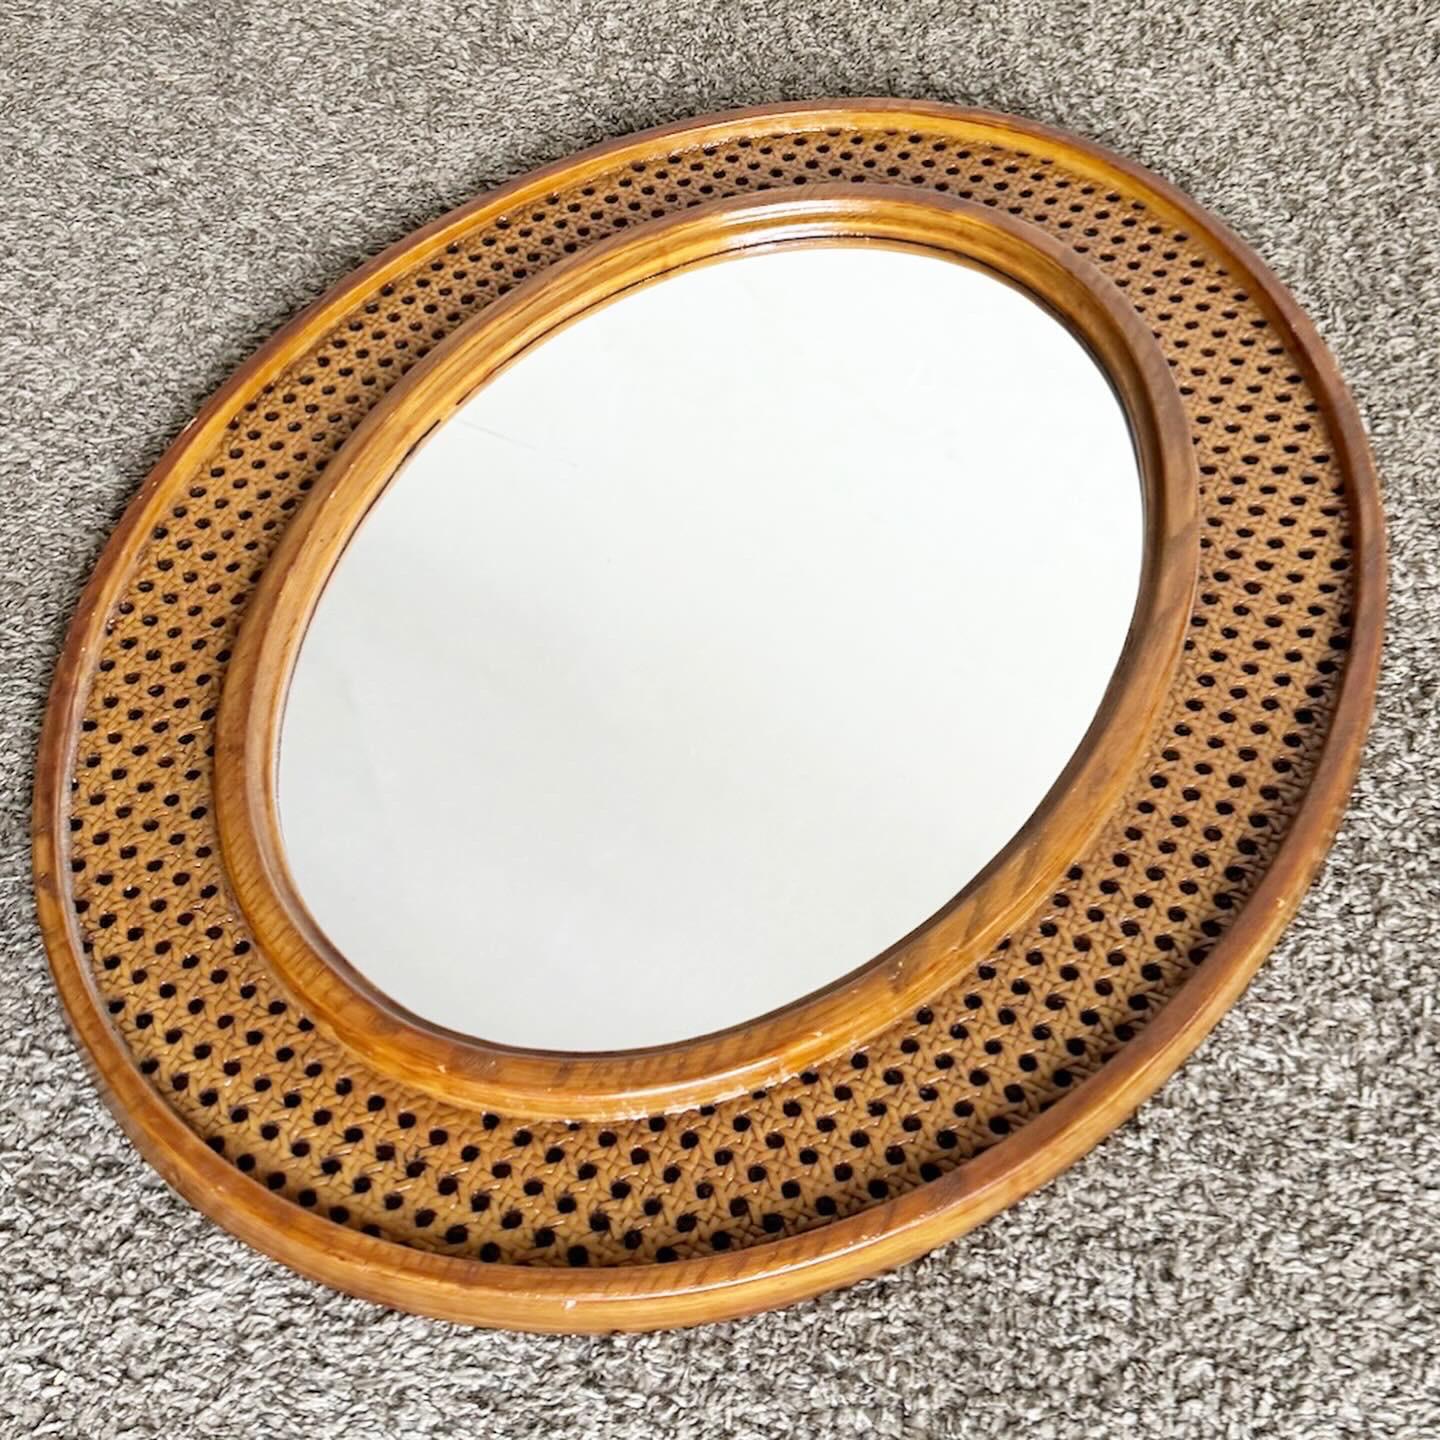 The Boho Chic Plastic Faux Cane Framed Wall Mirror combines modern materials with bohemian style. Its high-quality plastic frame, designed to resemble cane, adds rustic charm and warmth. The mirror provides a clear reflection, ideal for brightening